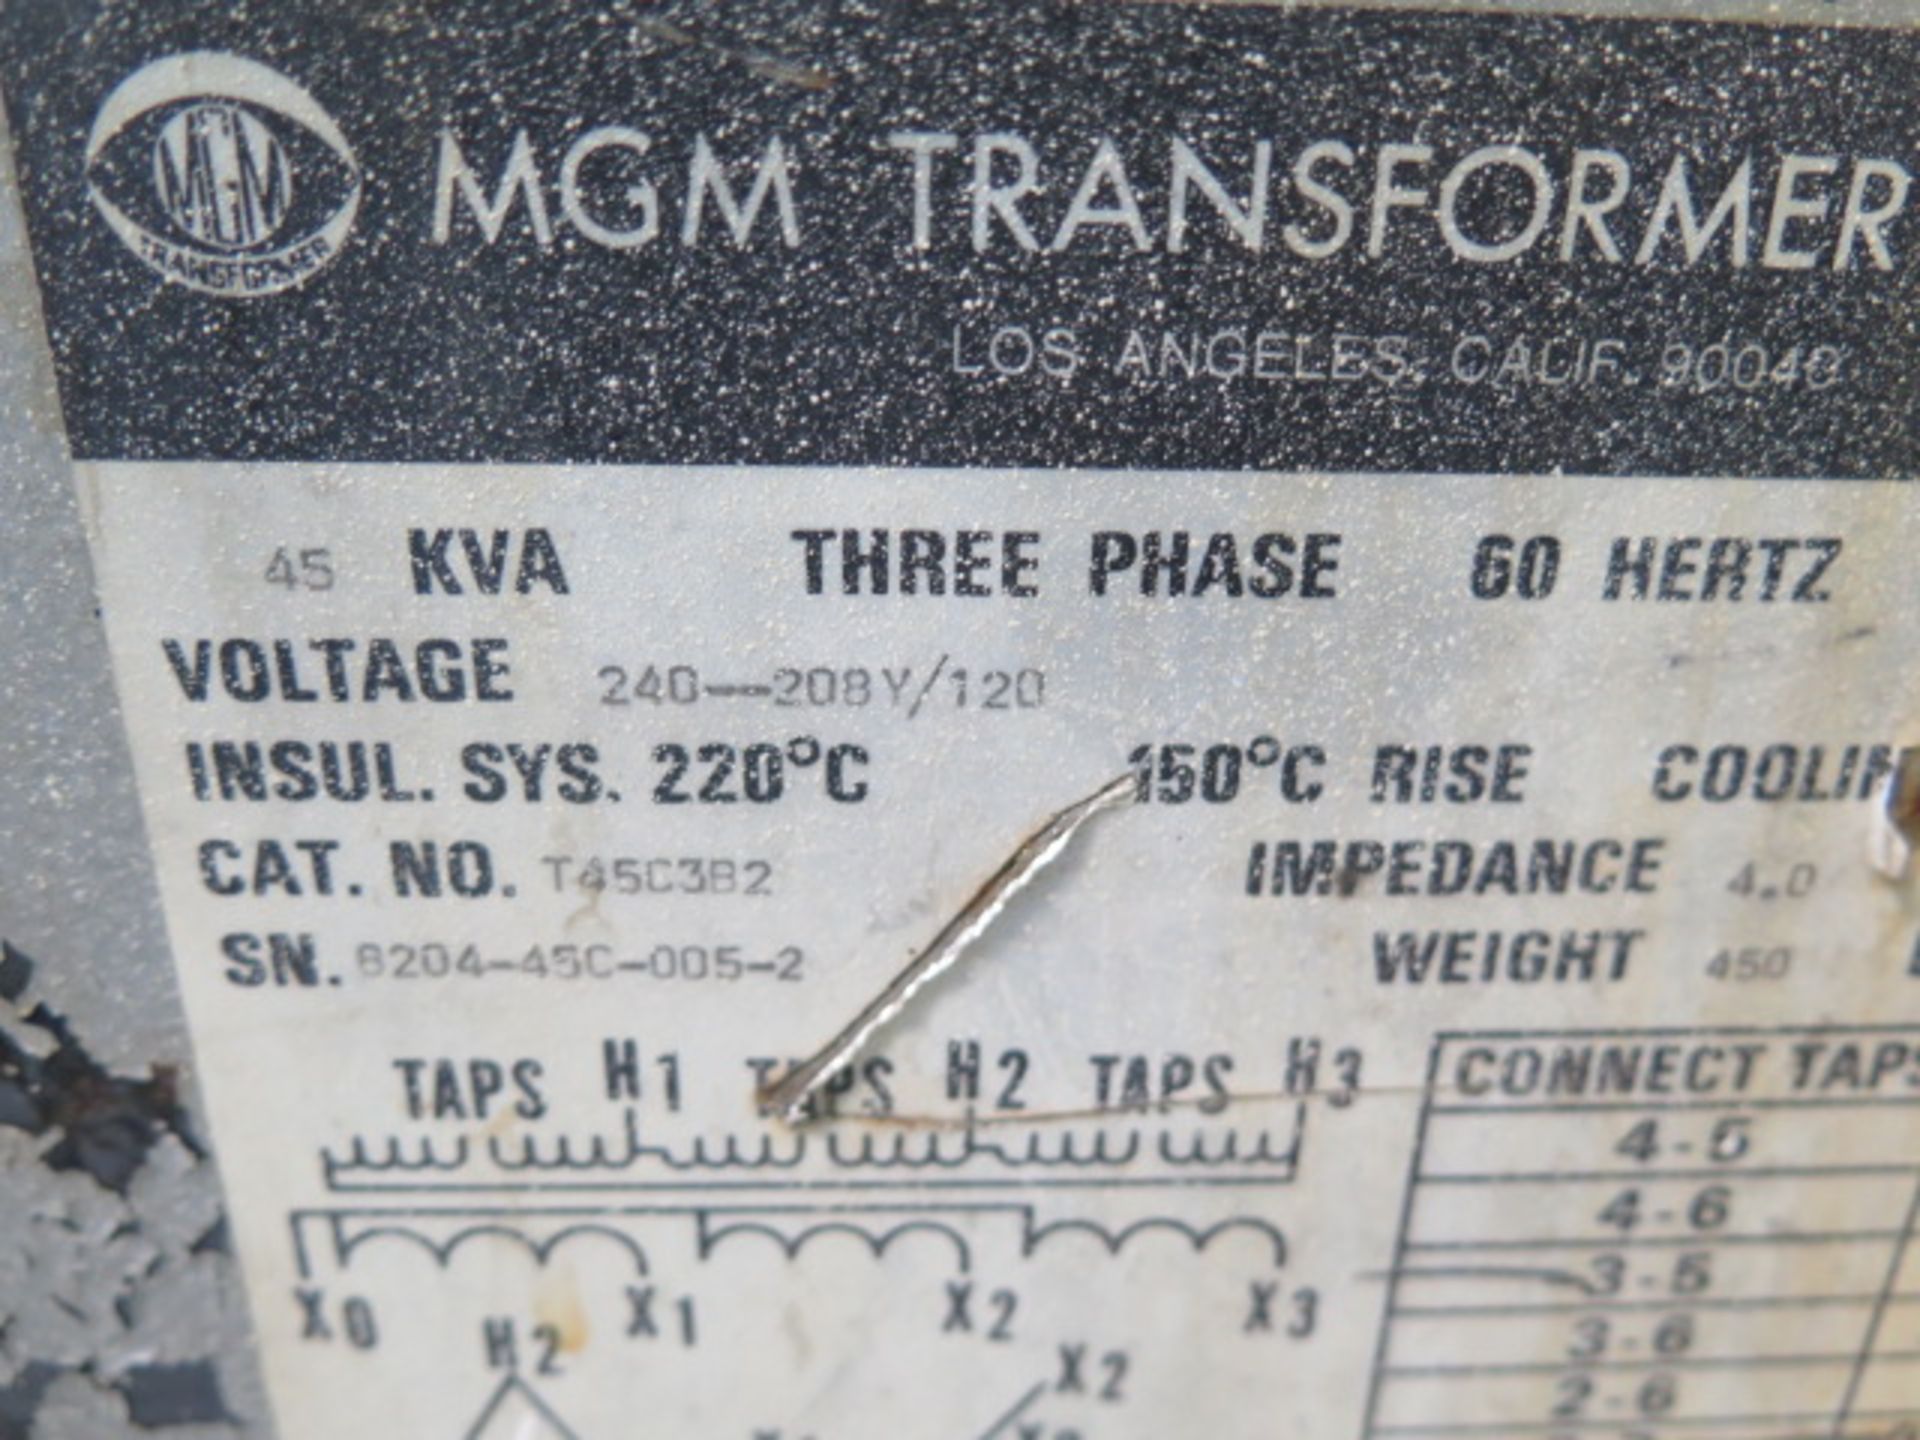 MGM 45kVA Teansformer 240-208Y/120 (SOLD AS-IS - NO WARRANTY) - Image 2 of 2